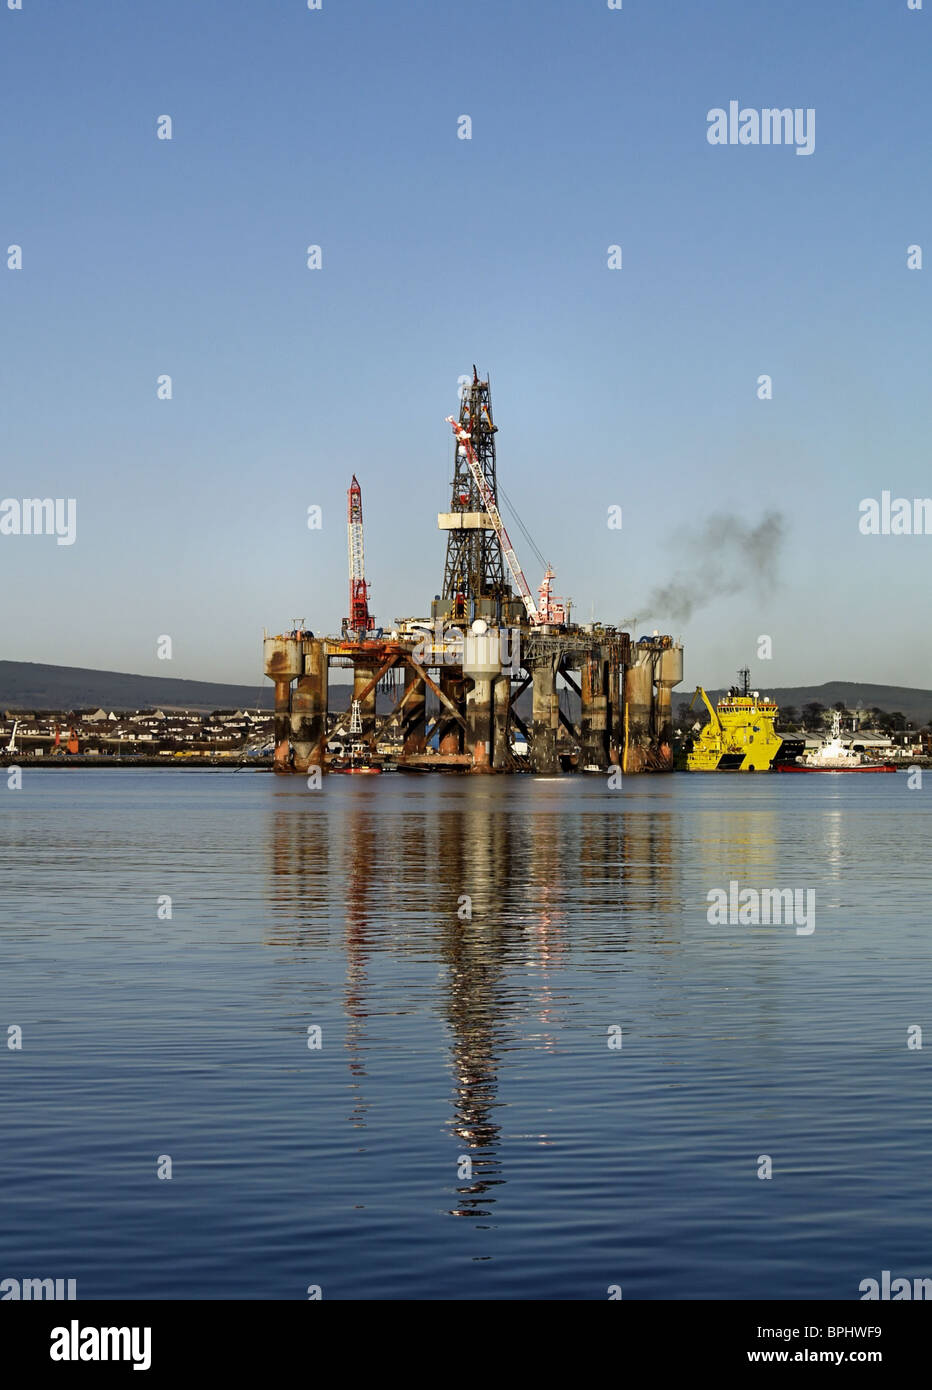 A Semi Sub Oil drilling rig is reflected in the waters of the Cromarty Firth, Scotland. Stock Photo